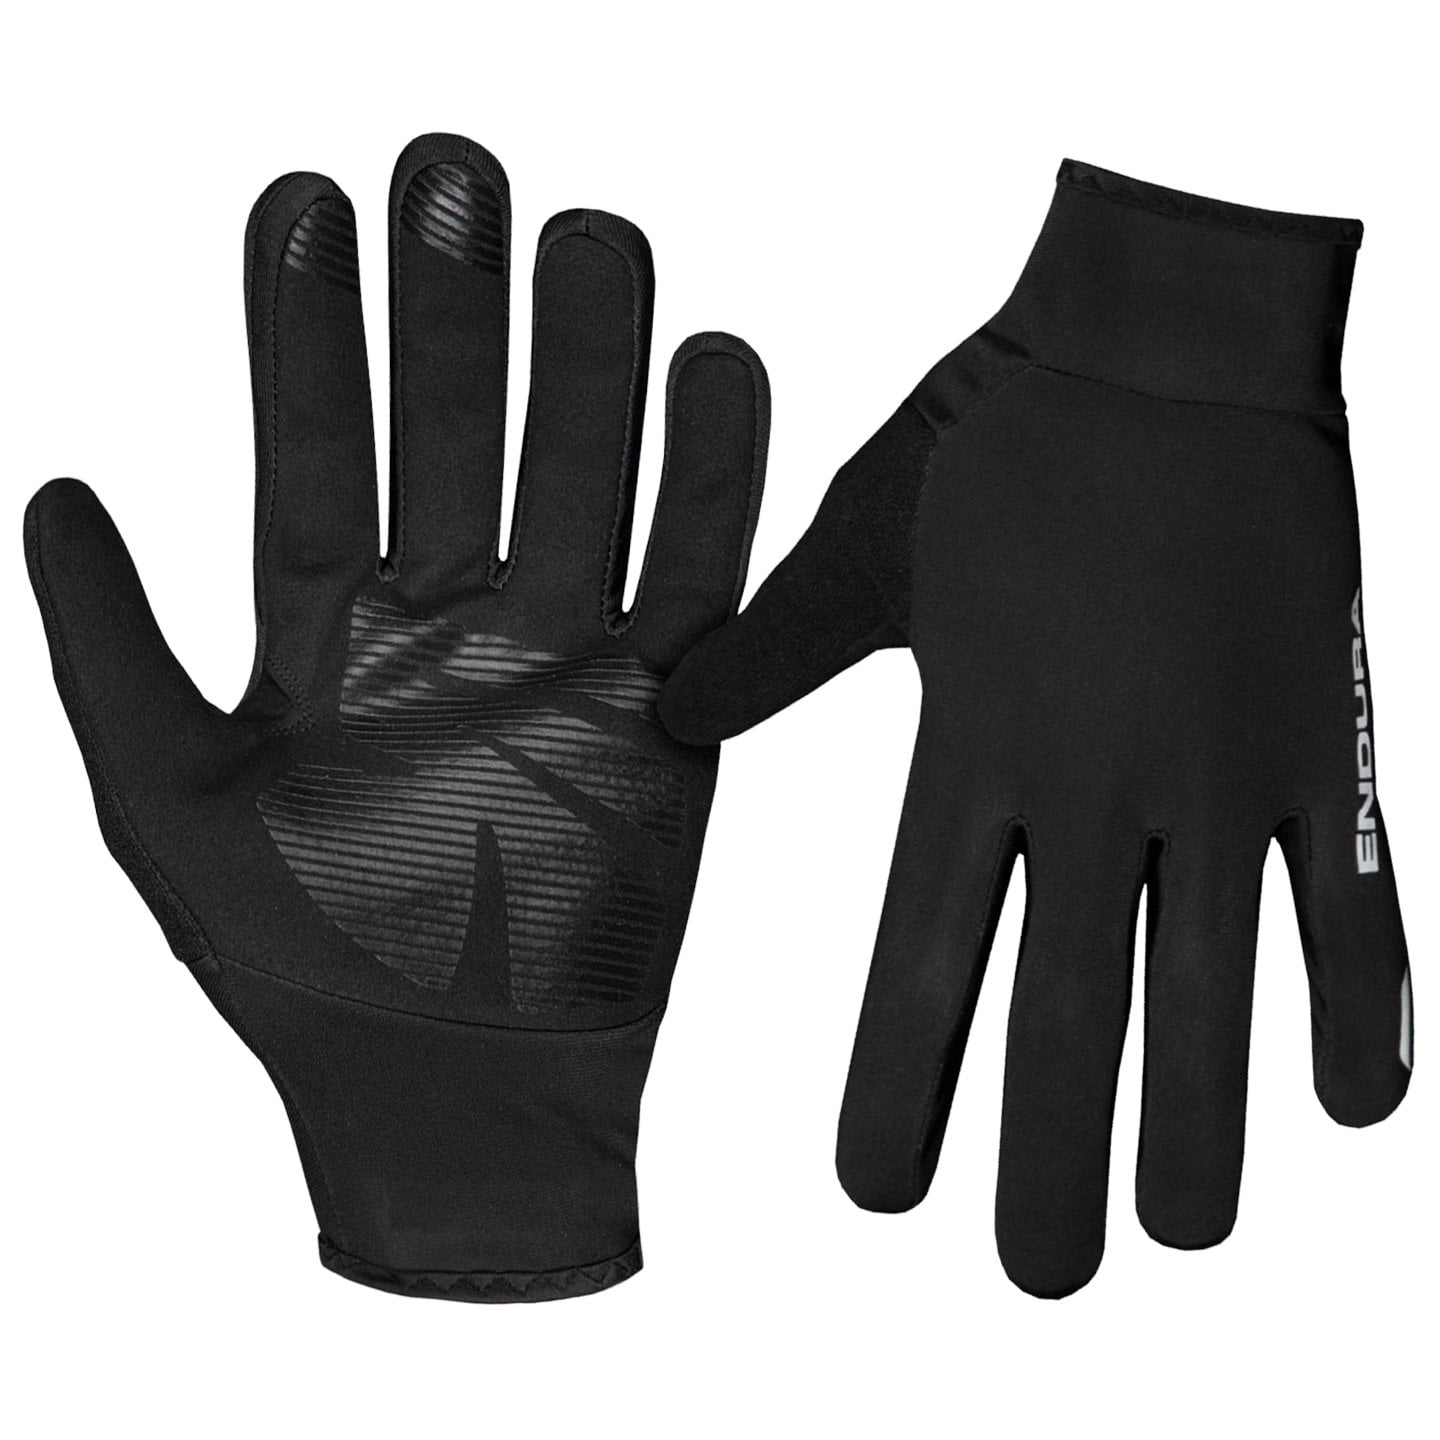 ENDURA FS260-Pro Thermo Winter Cycling Gloves Winter Cycling Gloves, for men, size M, Cycling gloves, Cycling gear